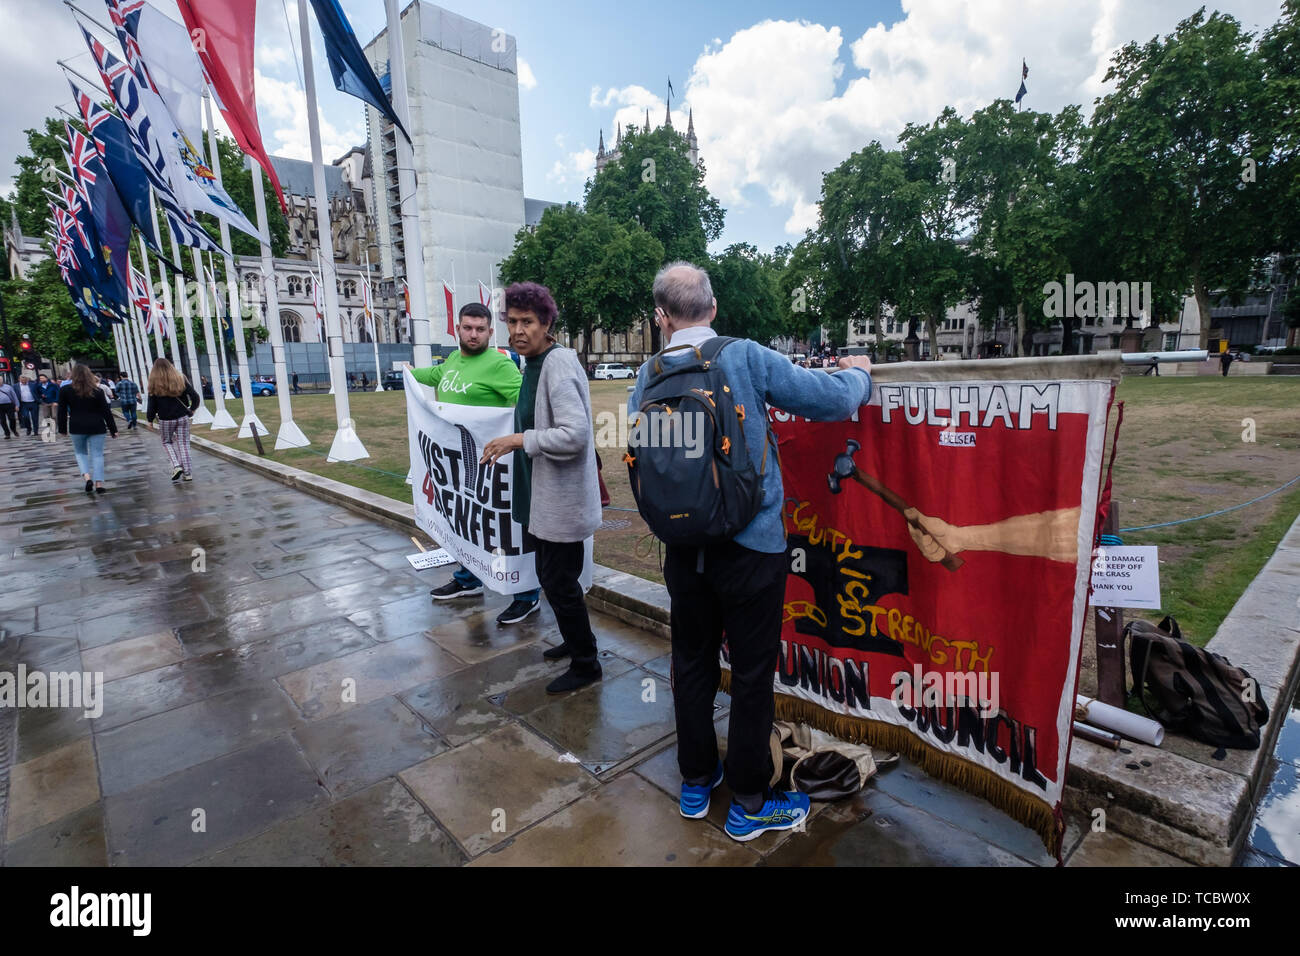 London, UK. 6th June 2019. Just before the second anniversary of the disastrous fire, a small group of activists including Moyra Samuels with Justice4Grenfell and Hammersith & Fulham TU Council banners at MP Emma Dent Coad asked questions. Promises made by Theresa May and Kensington & Chelsea council to the survivors have not been kept and no arrests have been made over the corruption, criminal negligence and disregard for safety that led to 72 deaths. They call for Government action to rehouse survivors, clear toxic waste, make all similar blocks safe and ensure justice. Peter Marshall/Alamy  Stock Photo